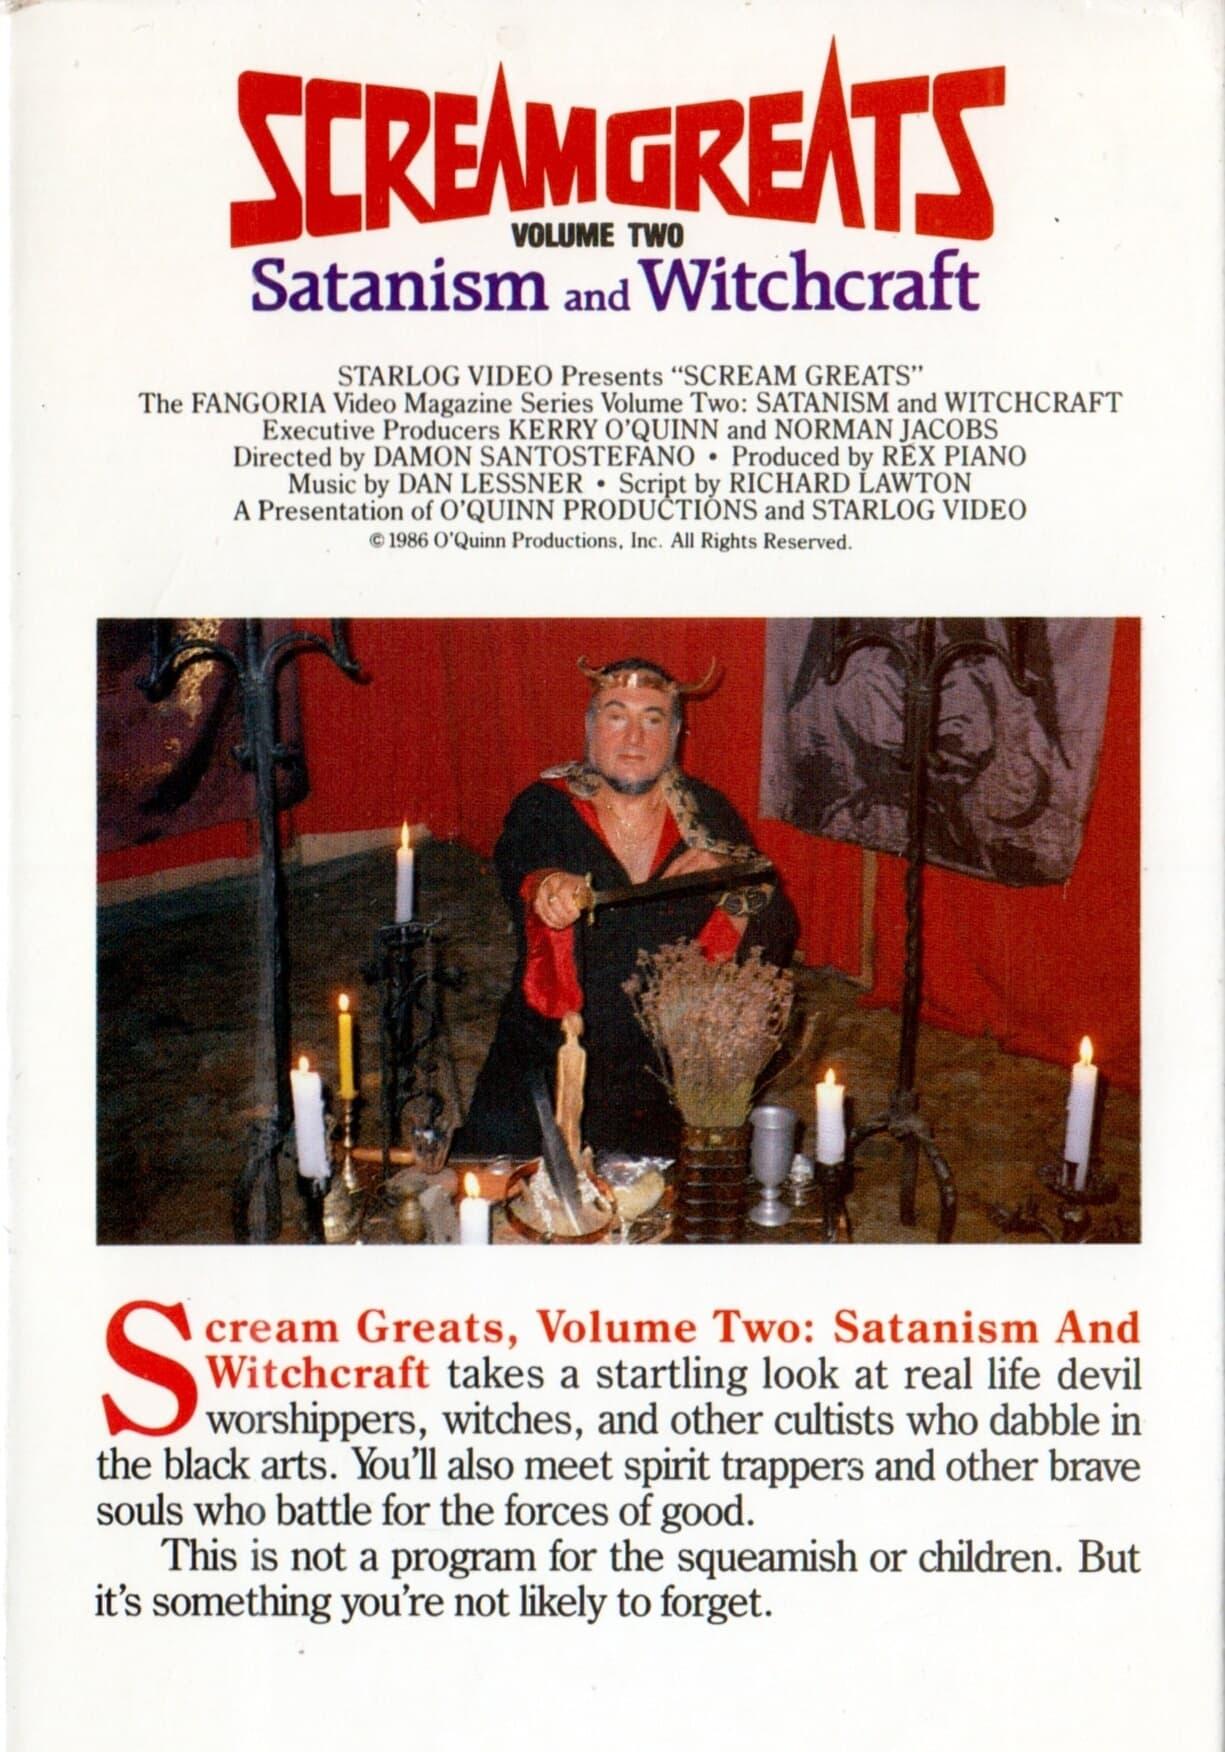 Scream Greats, Vol.2: Satanism and Witchcraft poster